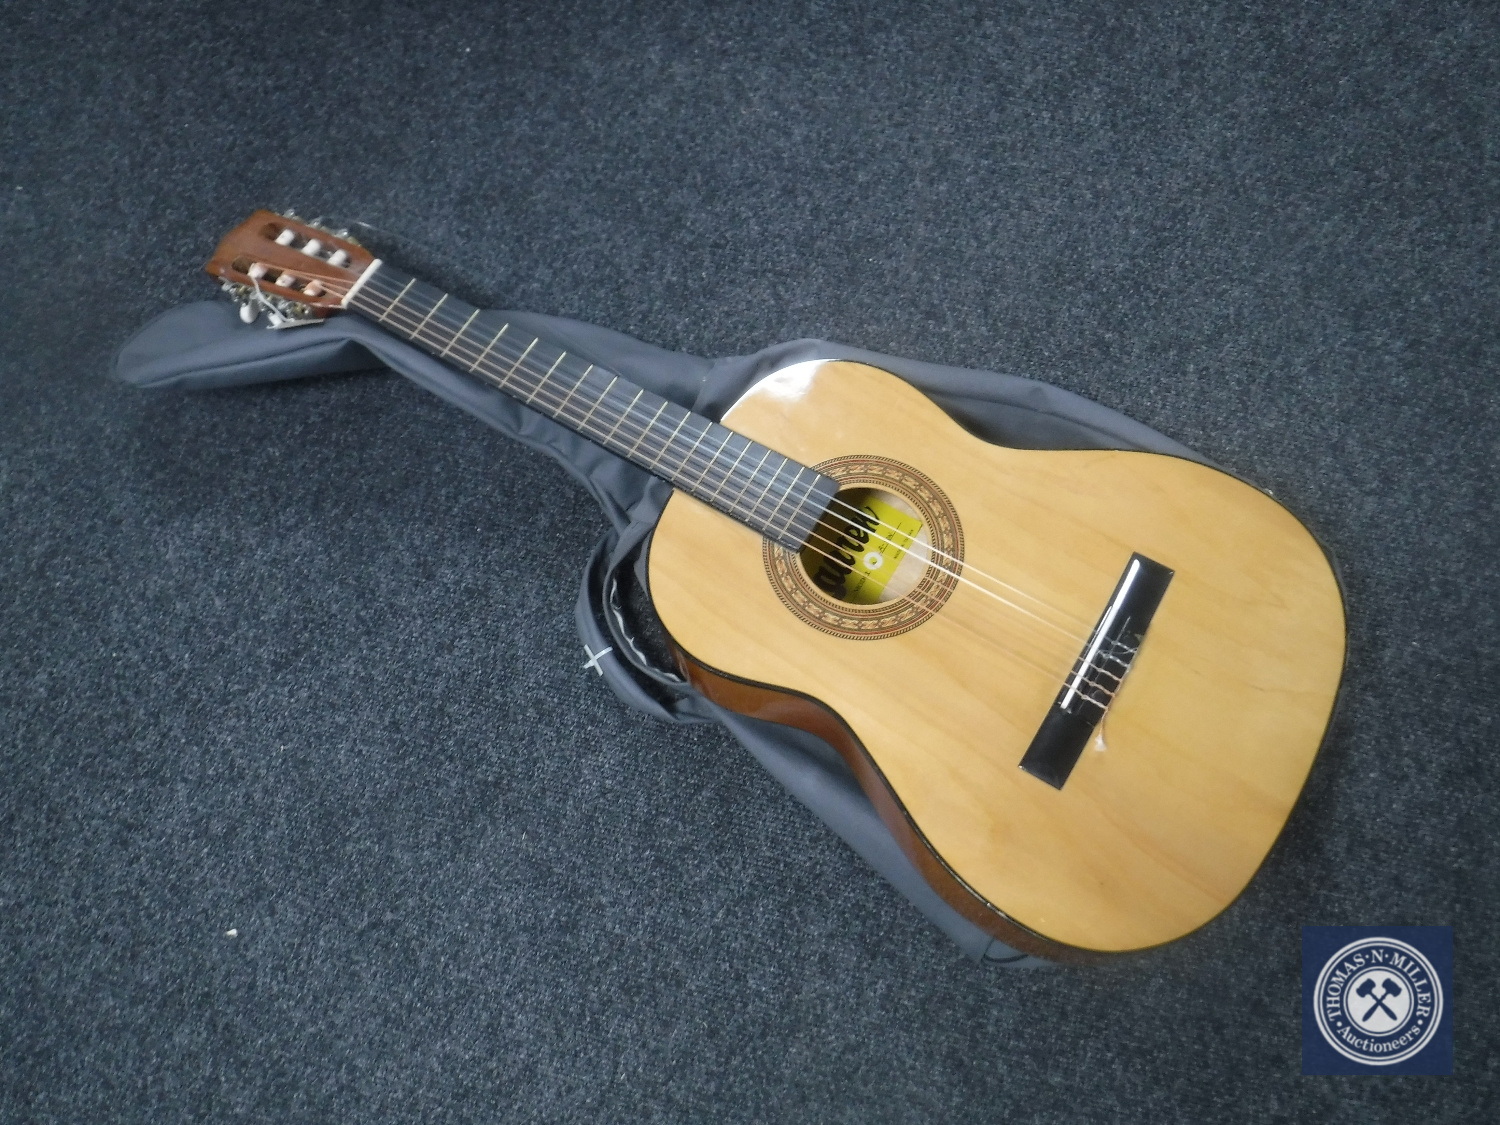 An acoustic guitar in carry bag